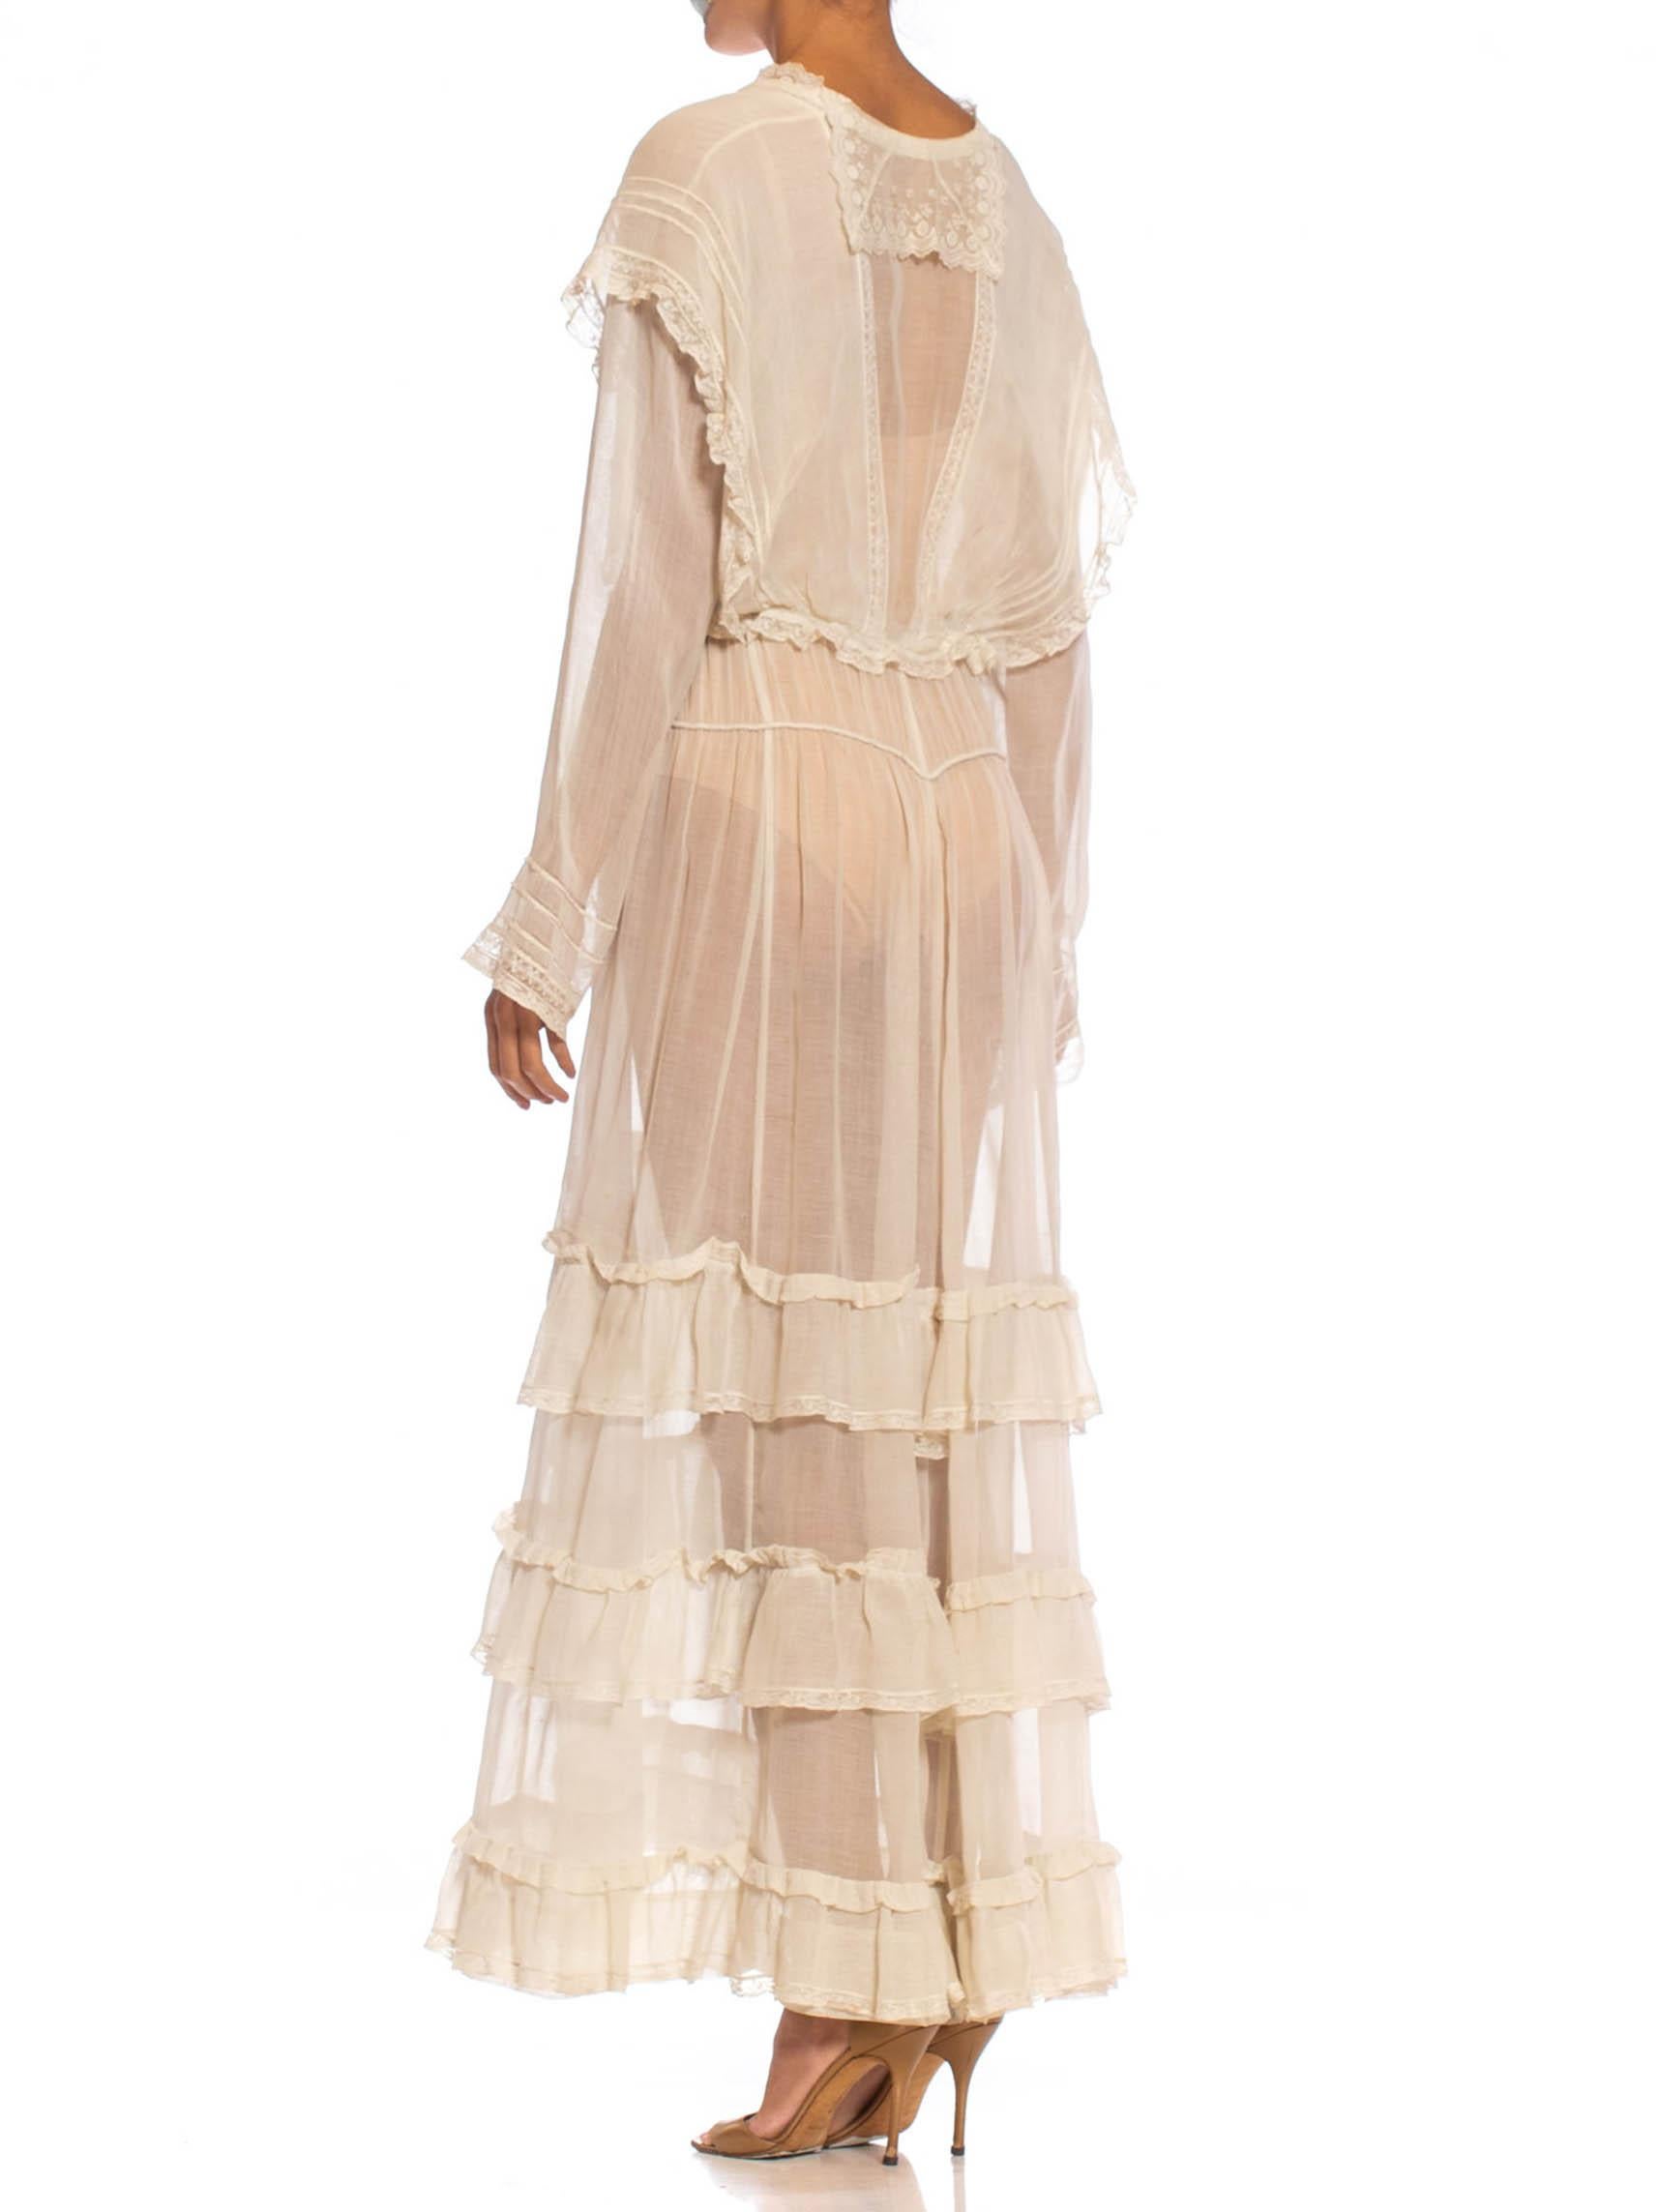 Edwardian Off White Organic Cotton Voile & Lace Long Sleeved Ruffled Tea Dress 5